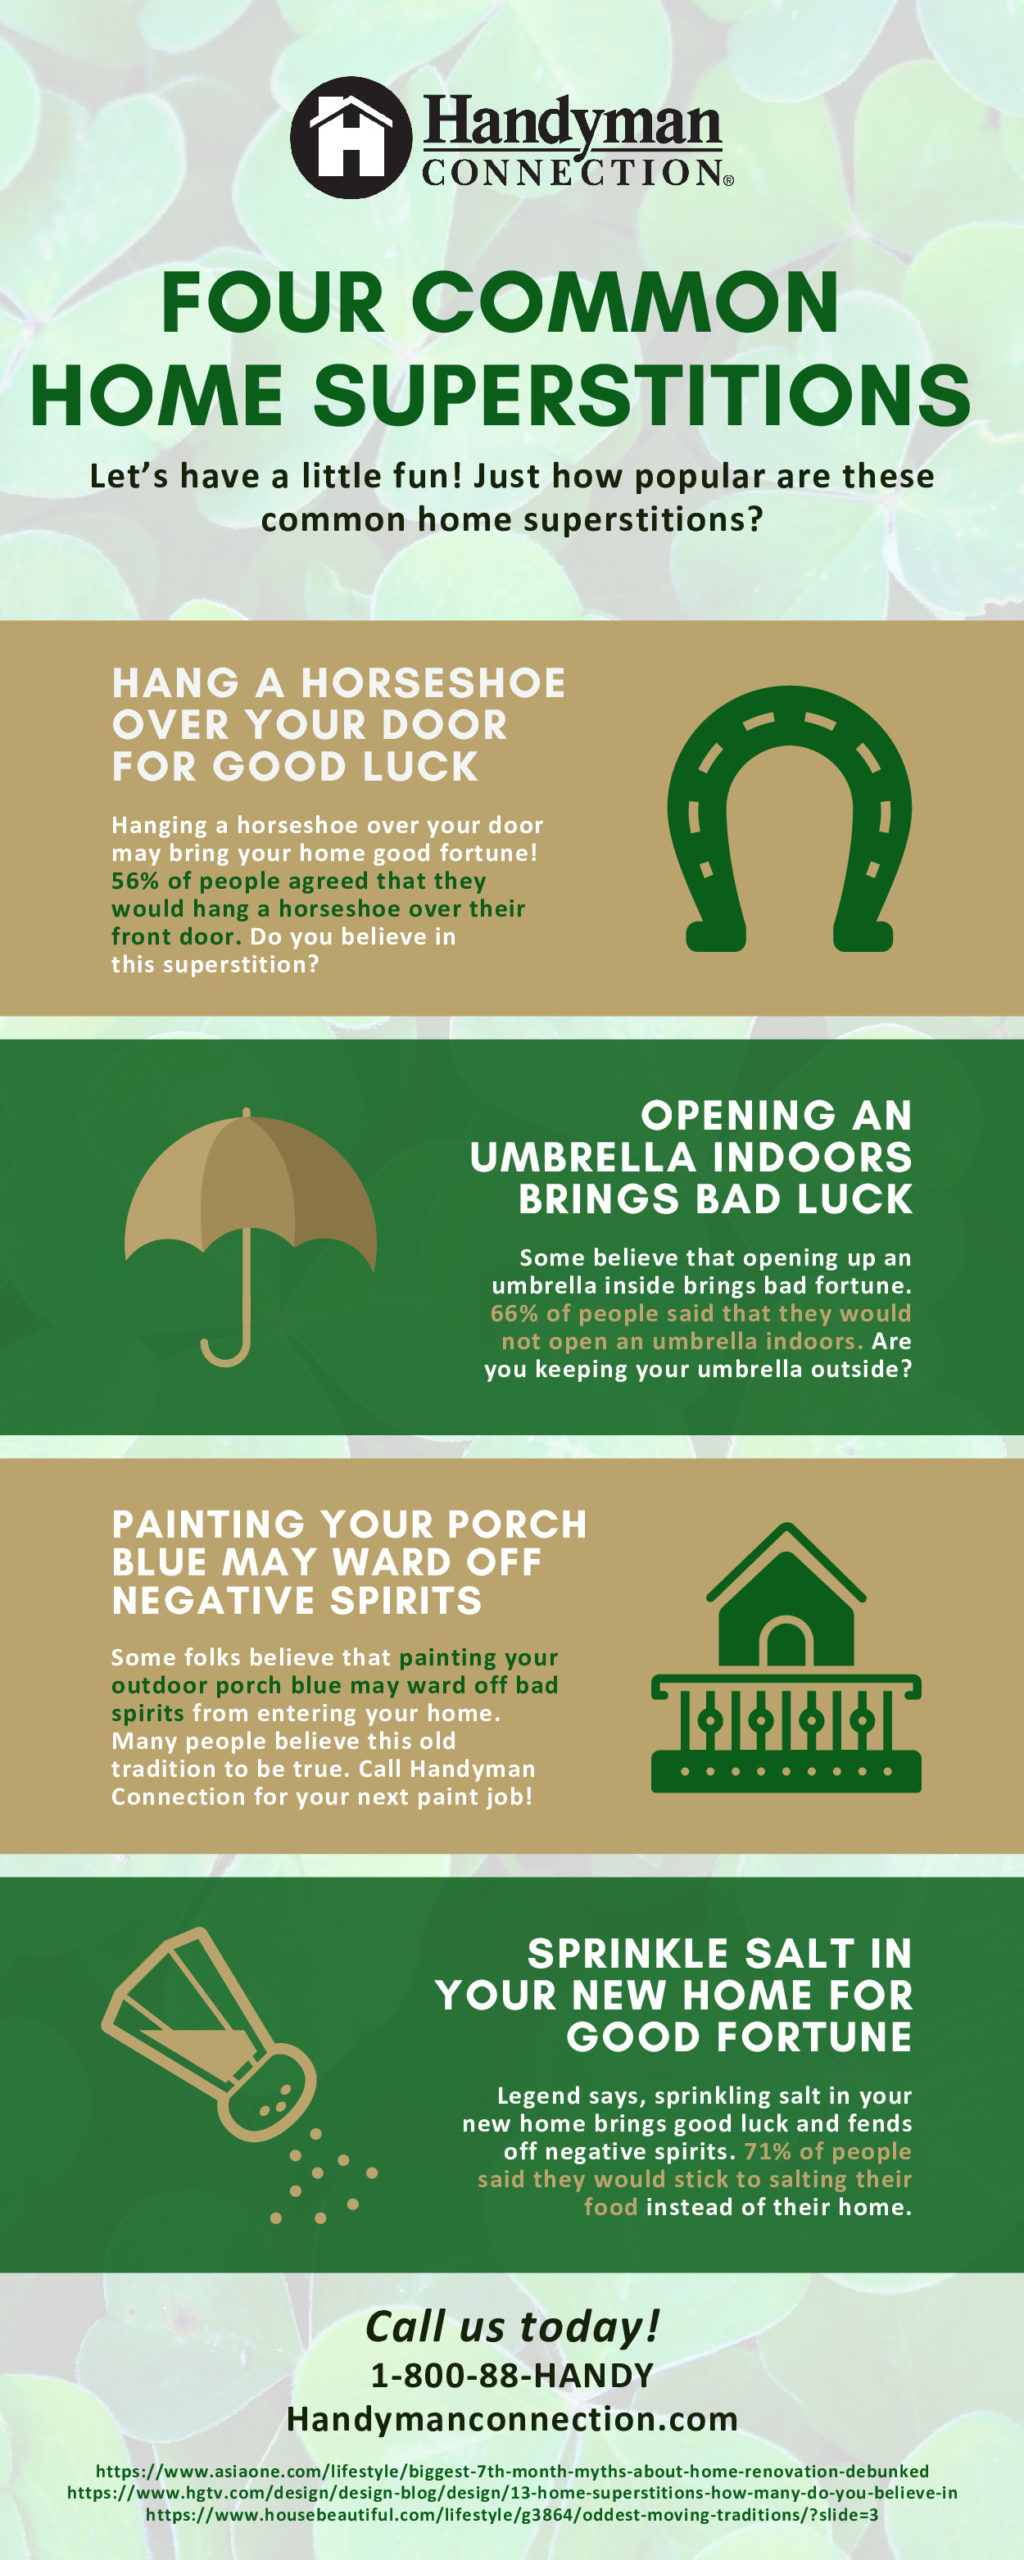 Four Common Home Superstitions [Infographic] - Handyman Corporate